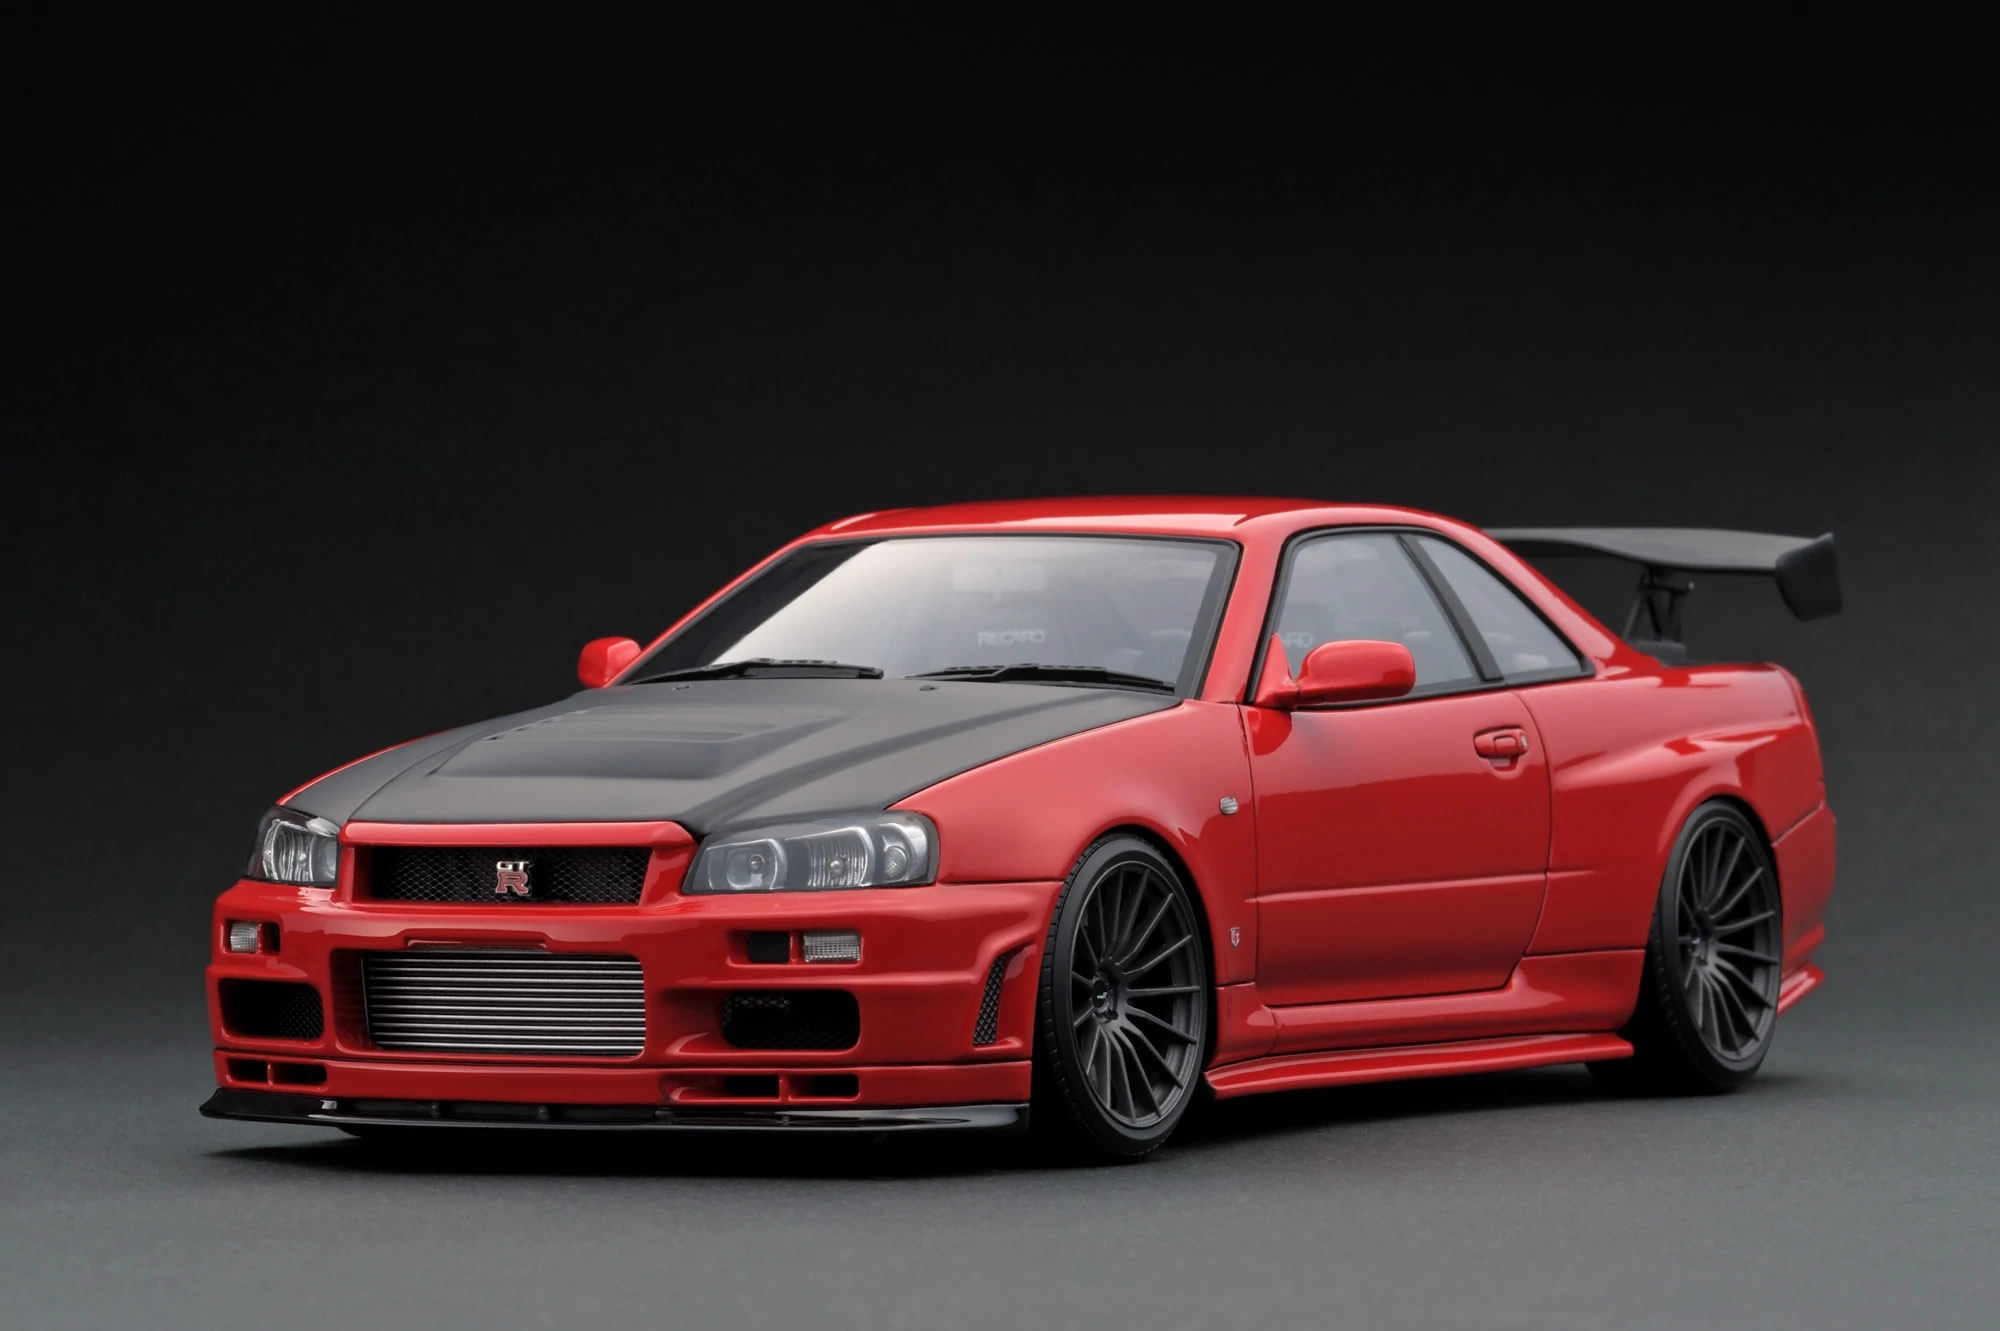 IG1831  <font color=red>1/18</font> Nismo R34 GT-R R-tune ɫ Nismo GT-R(R34) R-tune ư ɫɫɫ ENKEI RS05RR  18 Ӣ糵֣ǹɫ̼ά֡ԭװղɢƶǯɫGT ֱܡRECARO ΣN